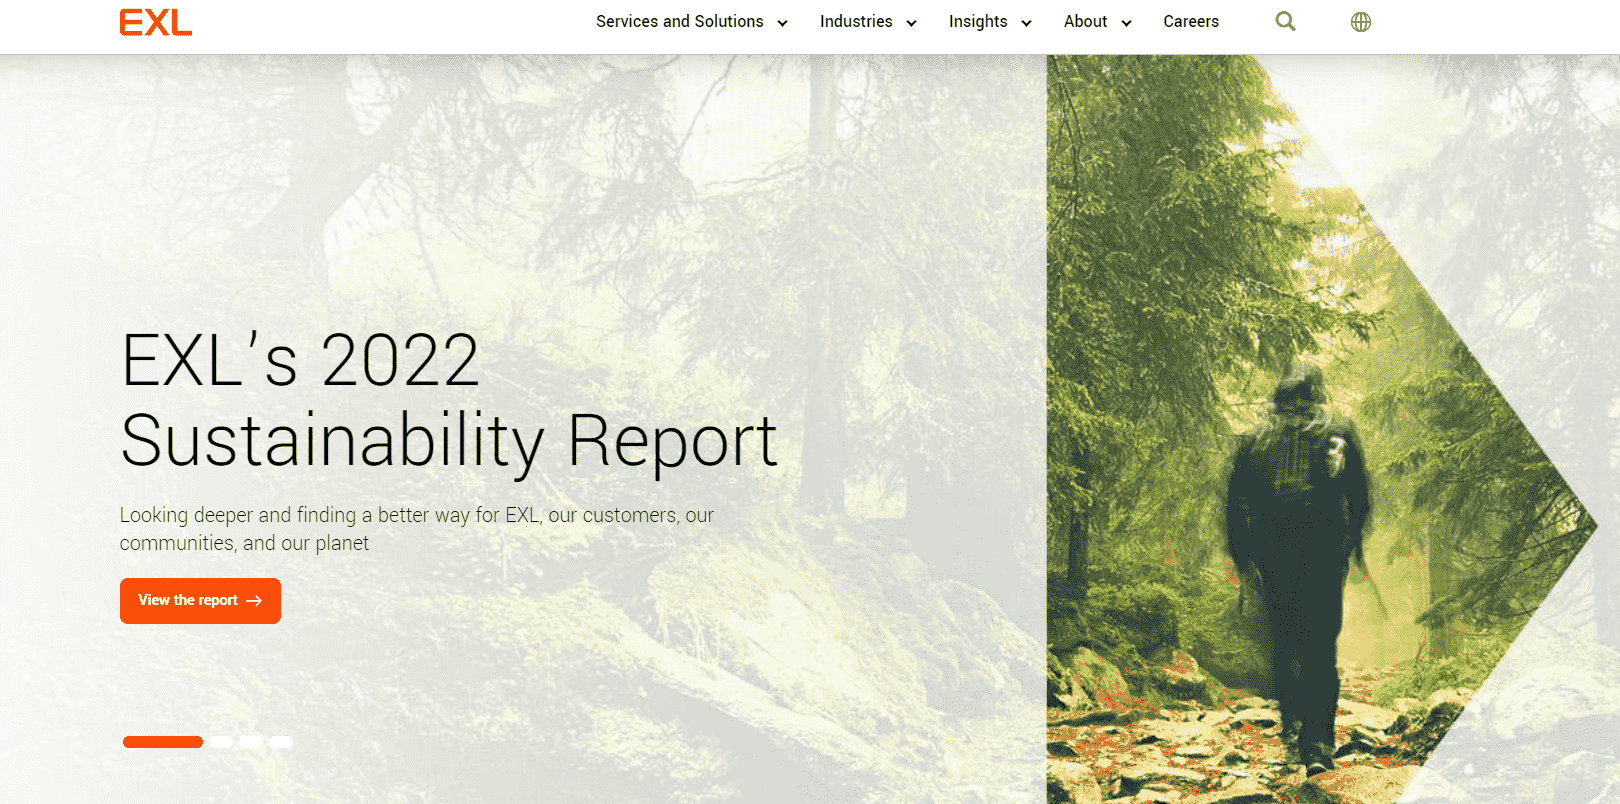 EXL's website mentioning their 2022 sustainability report on their BPO & other related work.